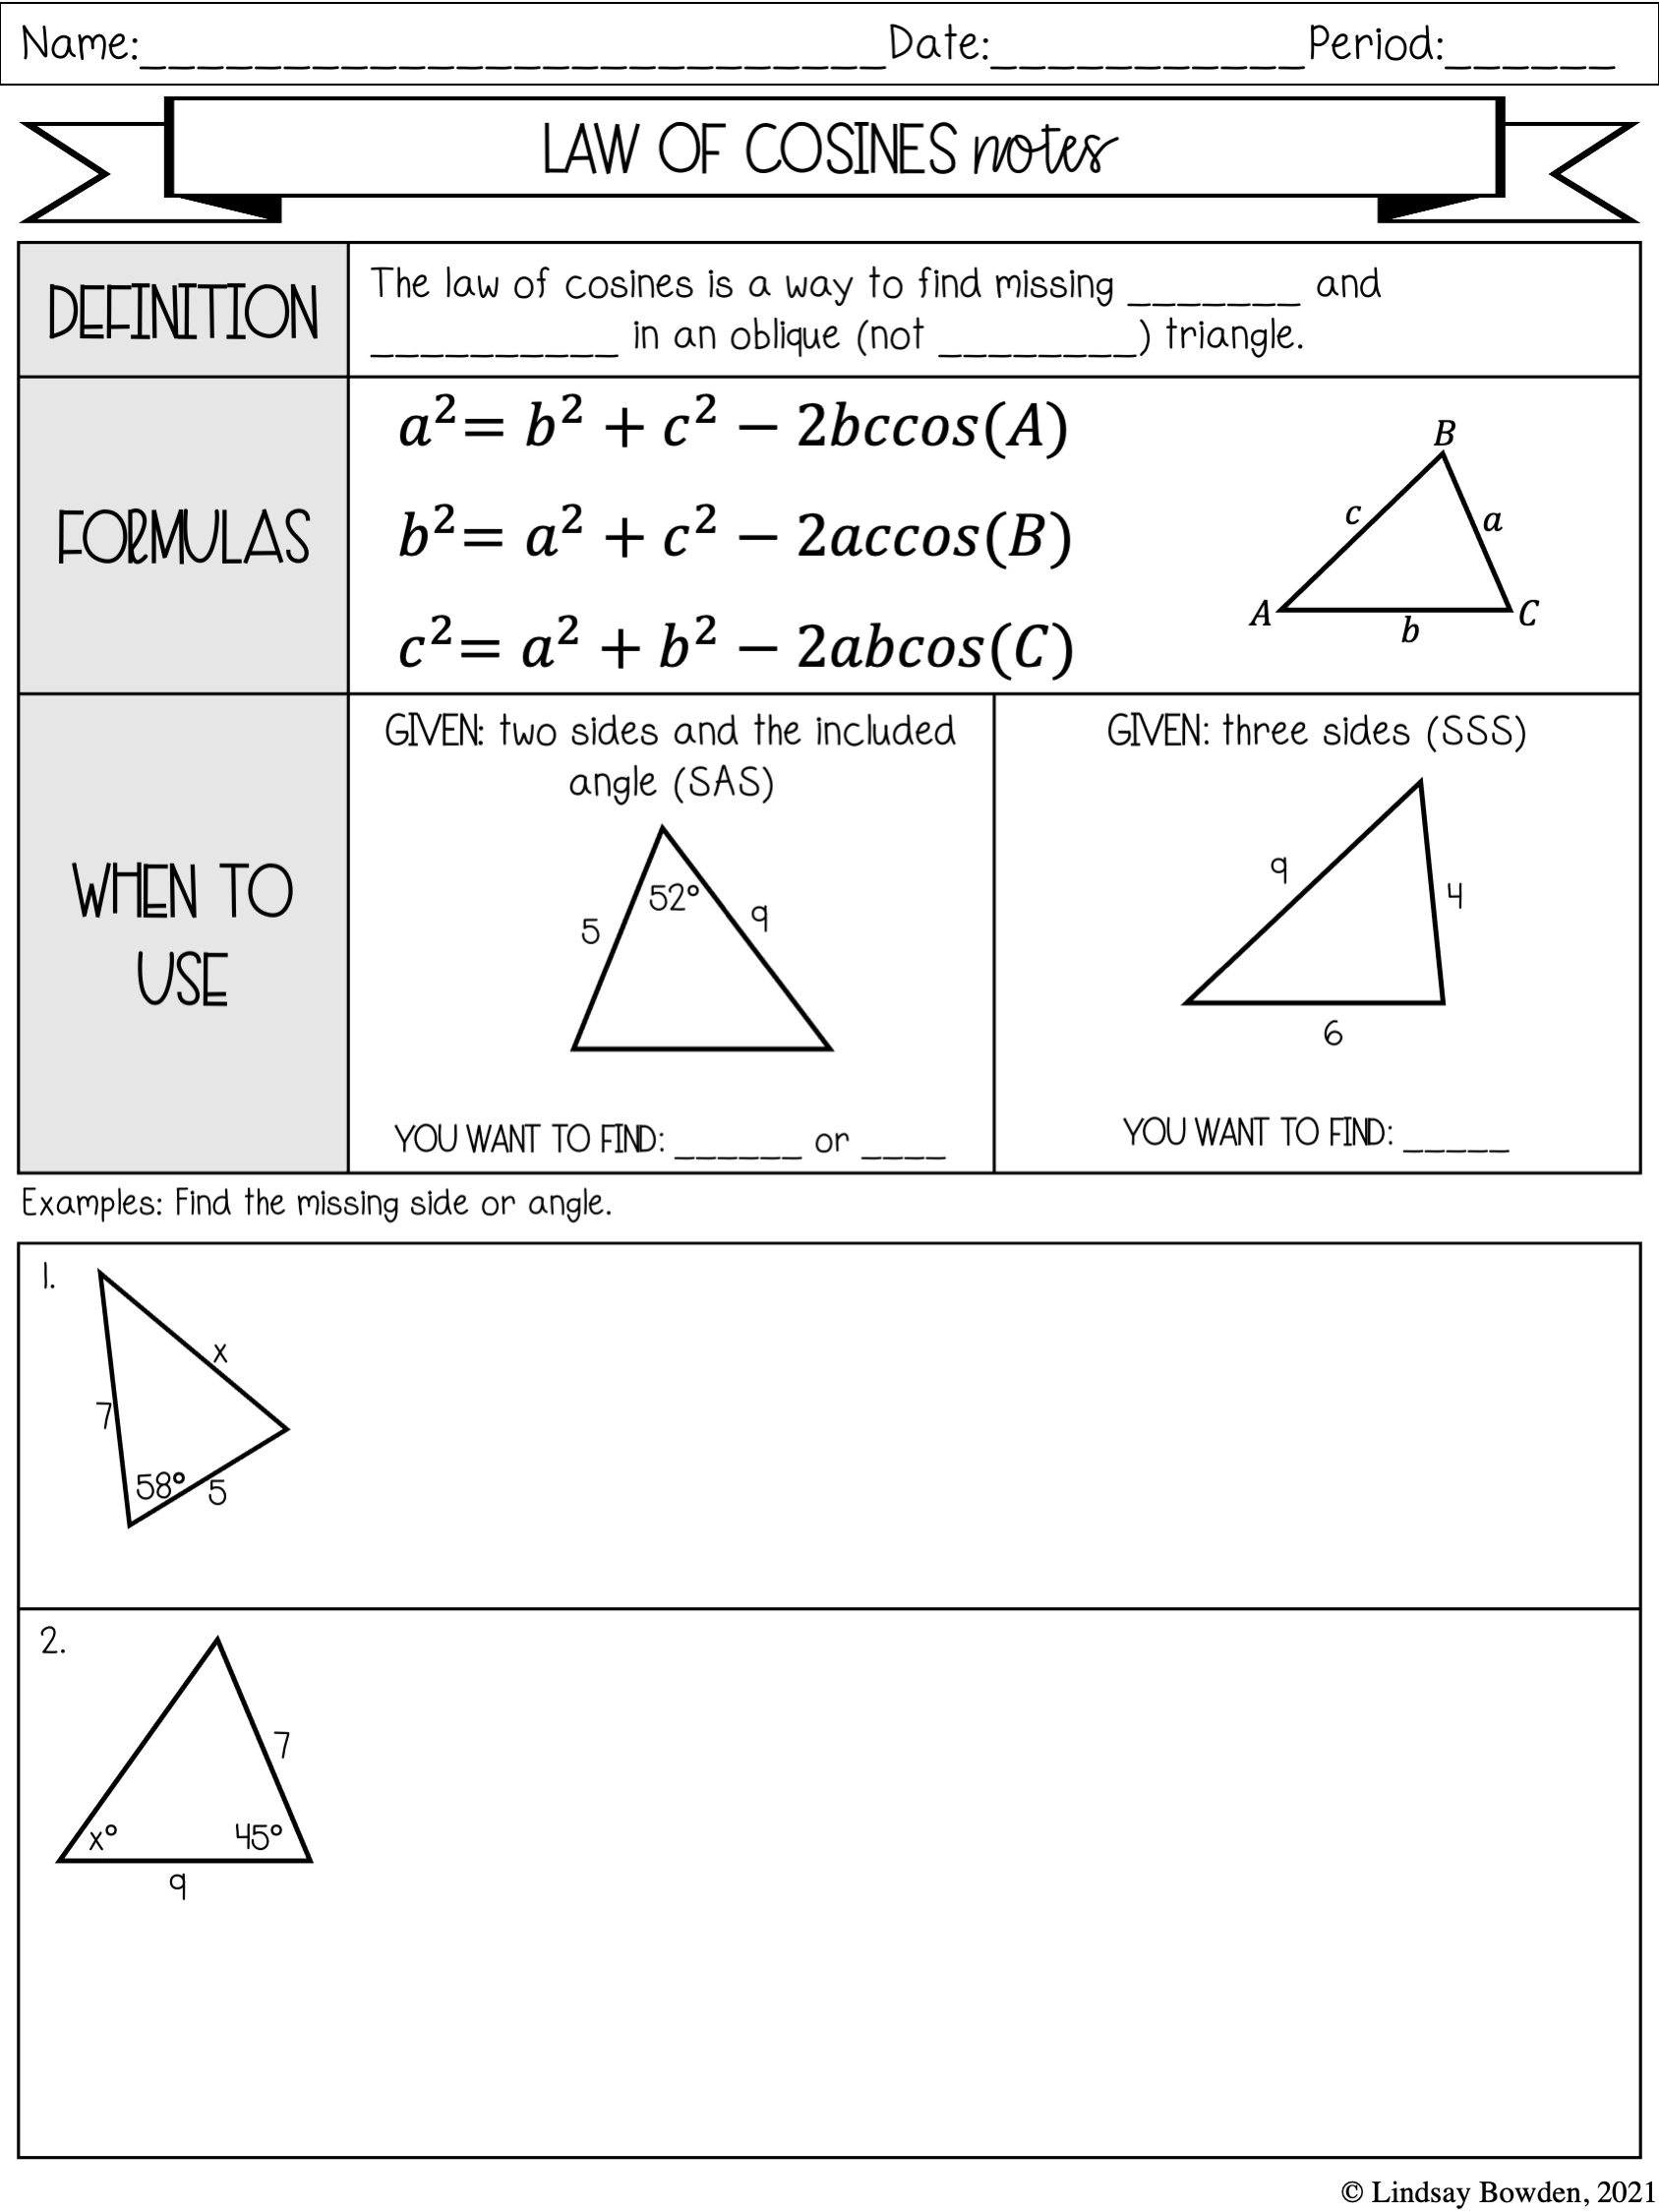 Law of Sines and Cosines Notes and Worksheets Lindsay Bowden